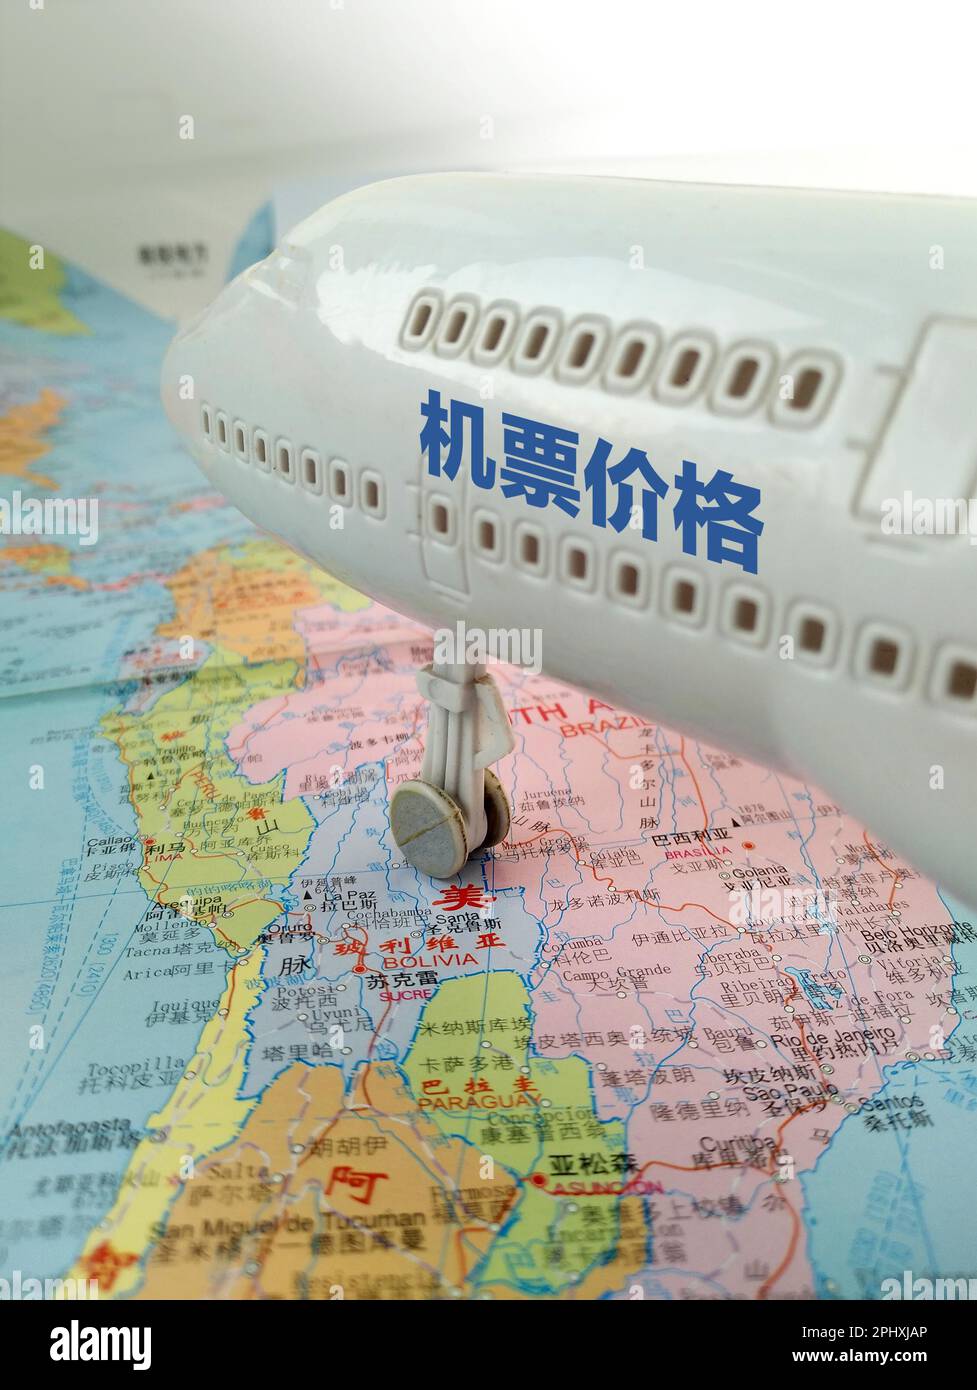 SUQIAN, CHINA - MARCH 30, 2023 - Illustration: Airfares, Suqian, Jiangsu province, China, March 30, 2023. The drop in air ticket prices in many countr Stock Photo